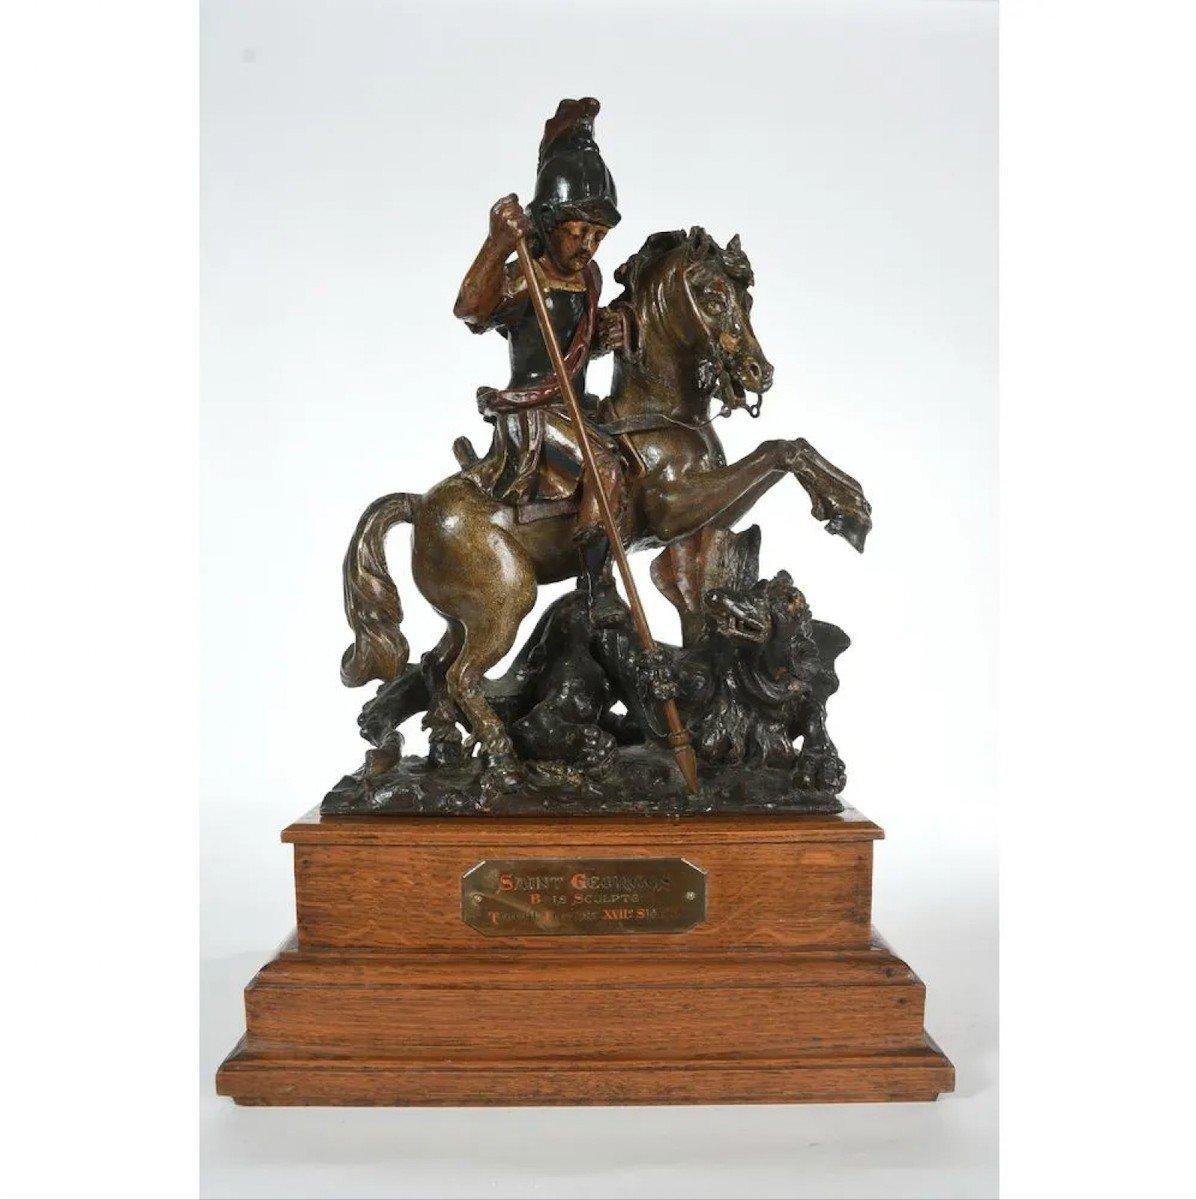 Unknown Figurative Sculpture - Saint George On Horseback Slaying The Dragon French Work Circa 1650